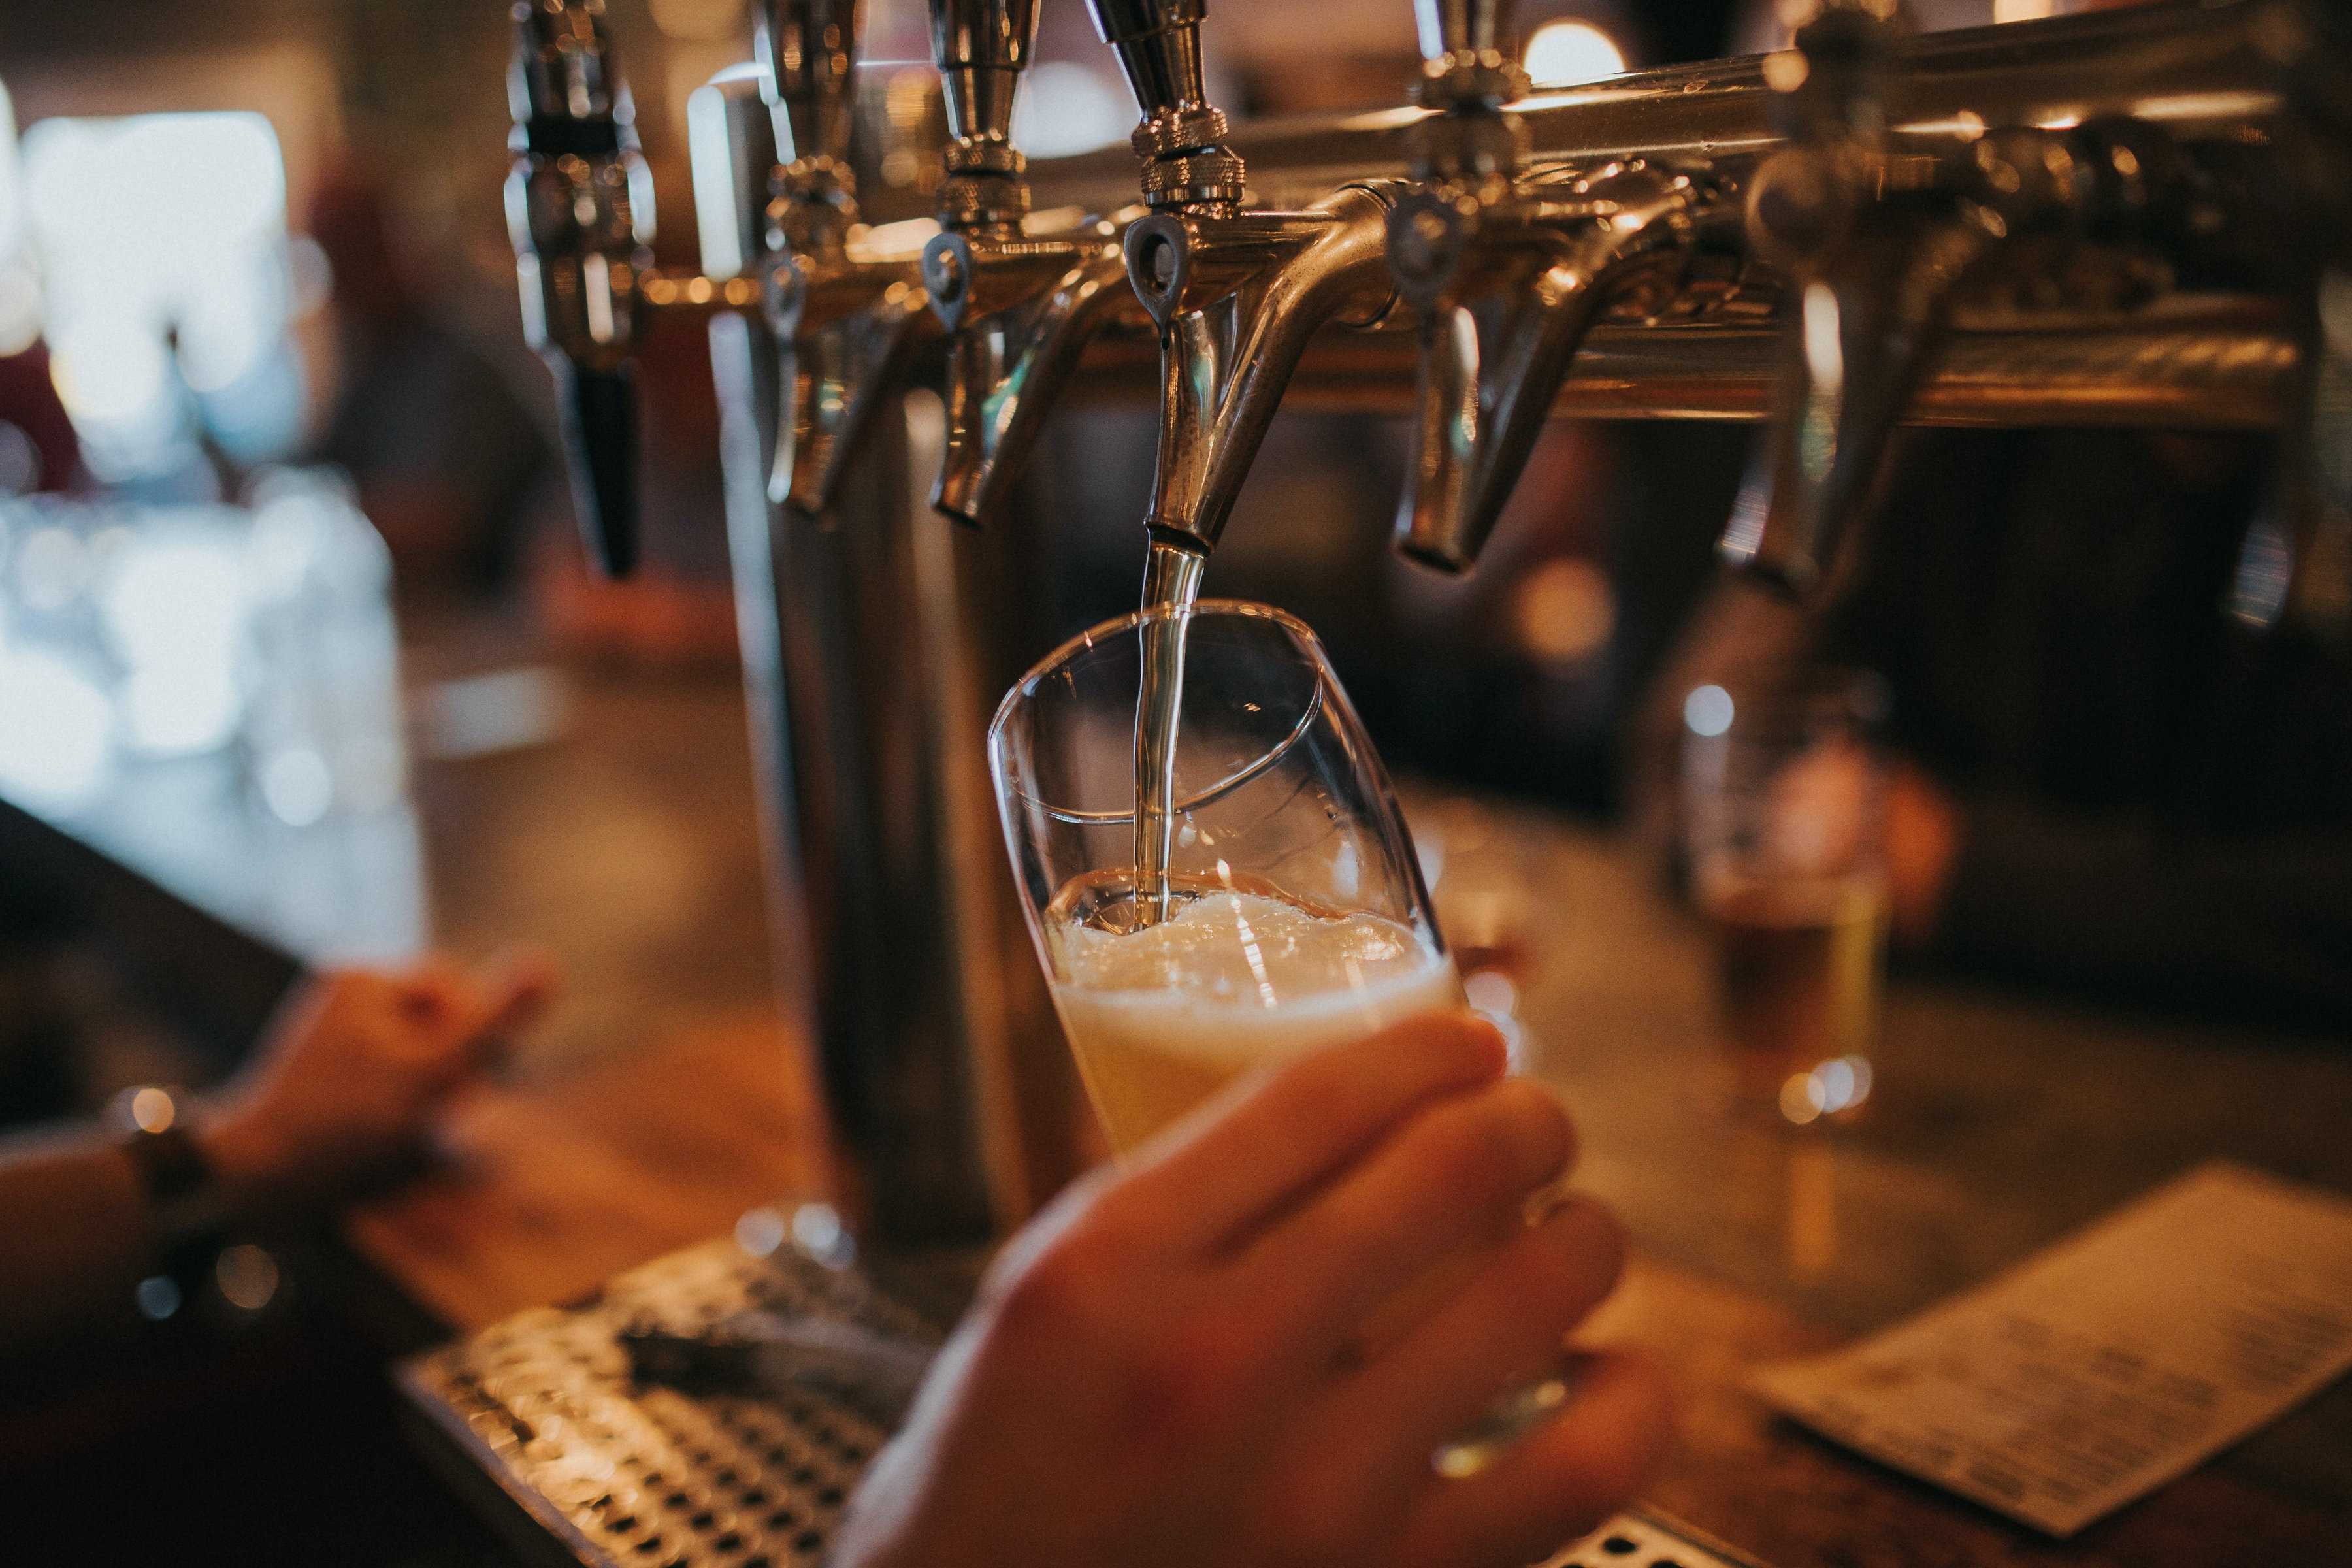 A glass being filled with beer from a tap